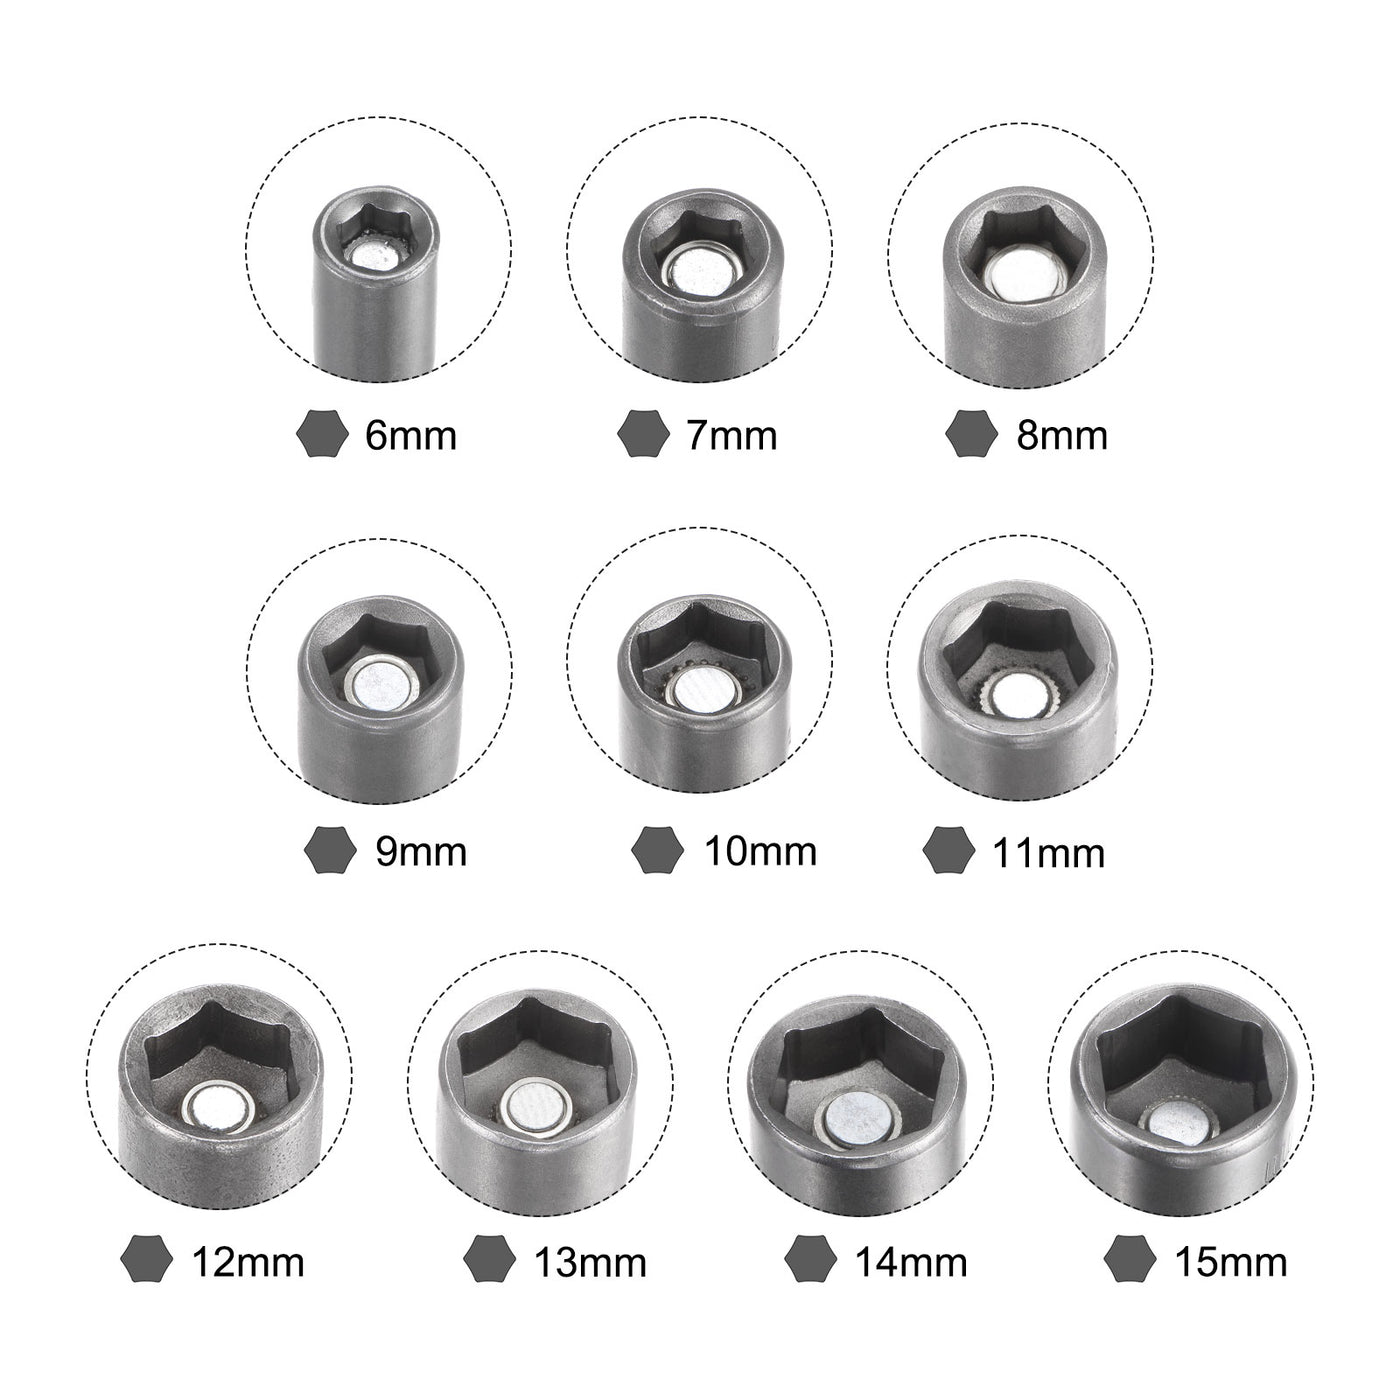 uxcell Uxcell 1/4" Quick-Change Hex Shank 6-15mm Magnetic Nut Driver Bit Set of 10 Piece, CR-V